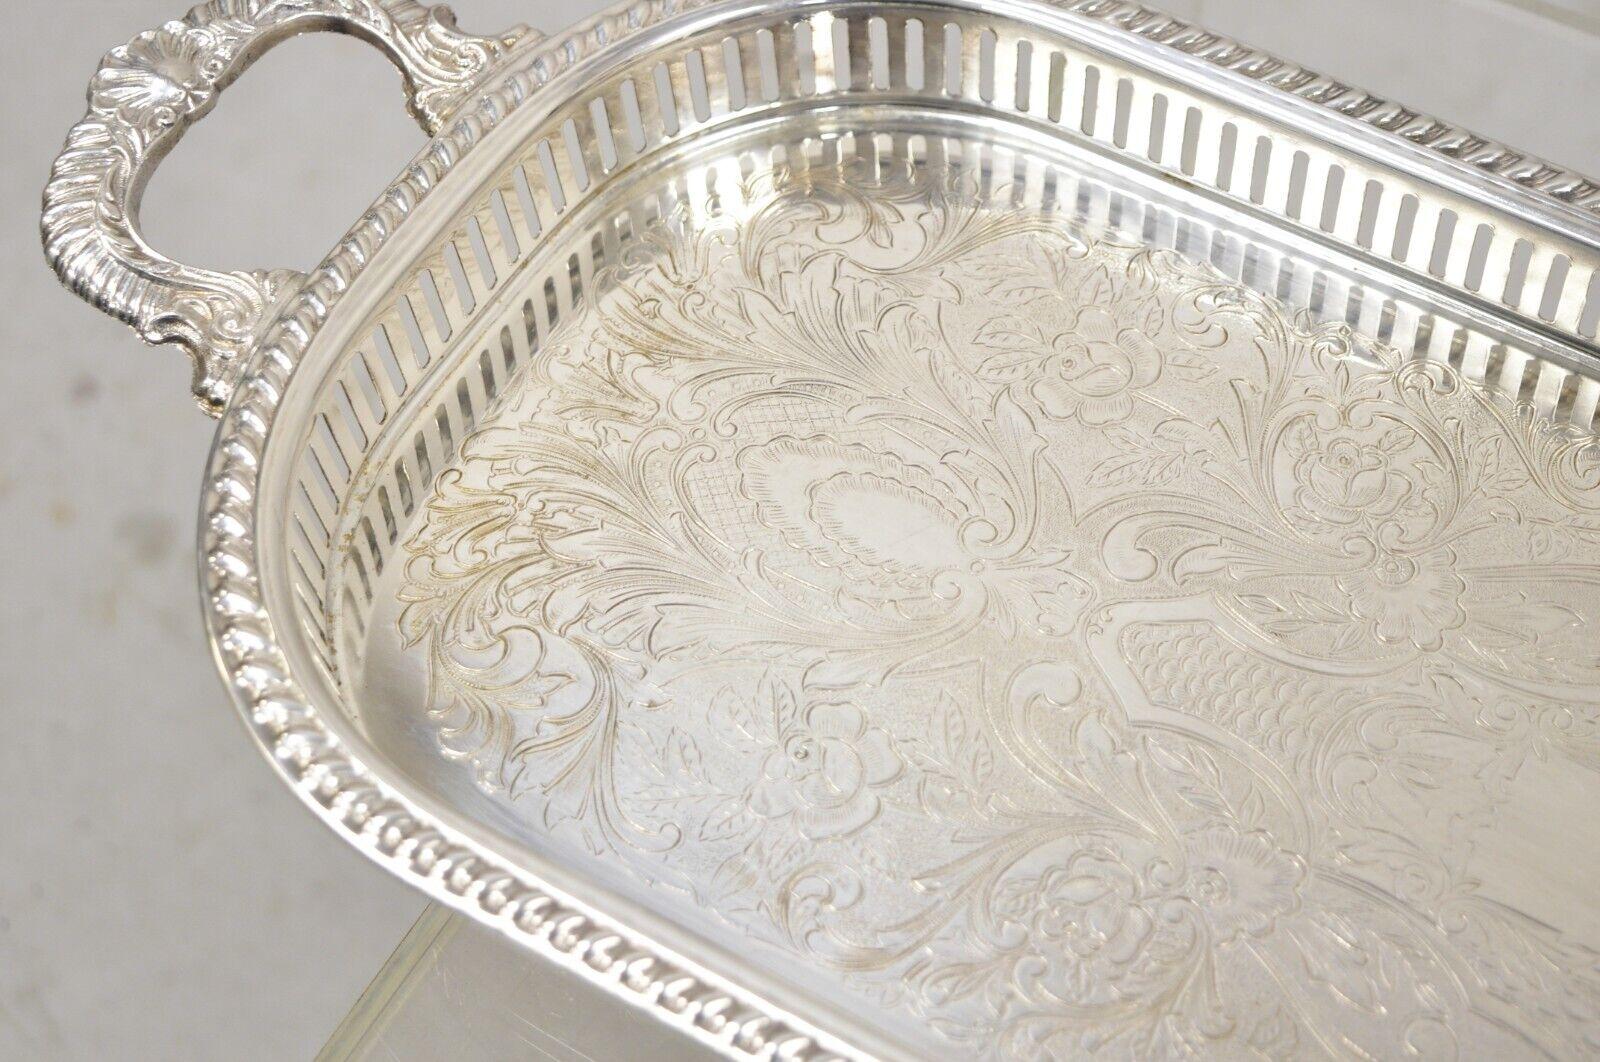 Vtg Victorian Style Silver Plated Narrow Oval Serving Platter Tray by Regency For Sale 4